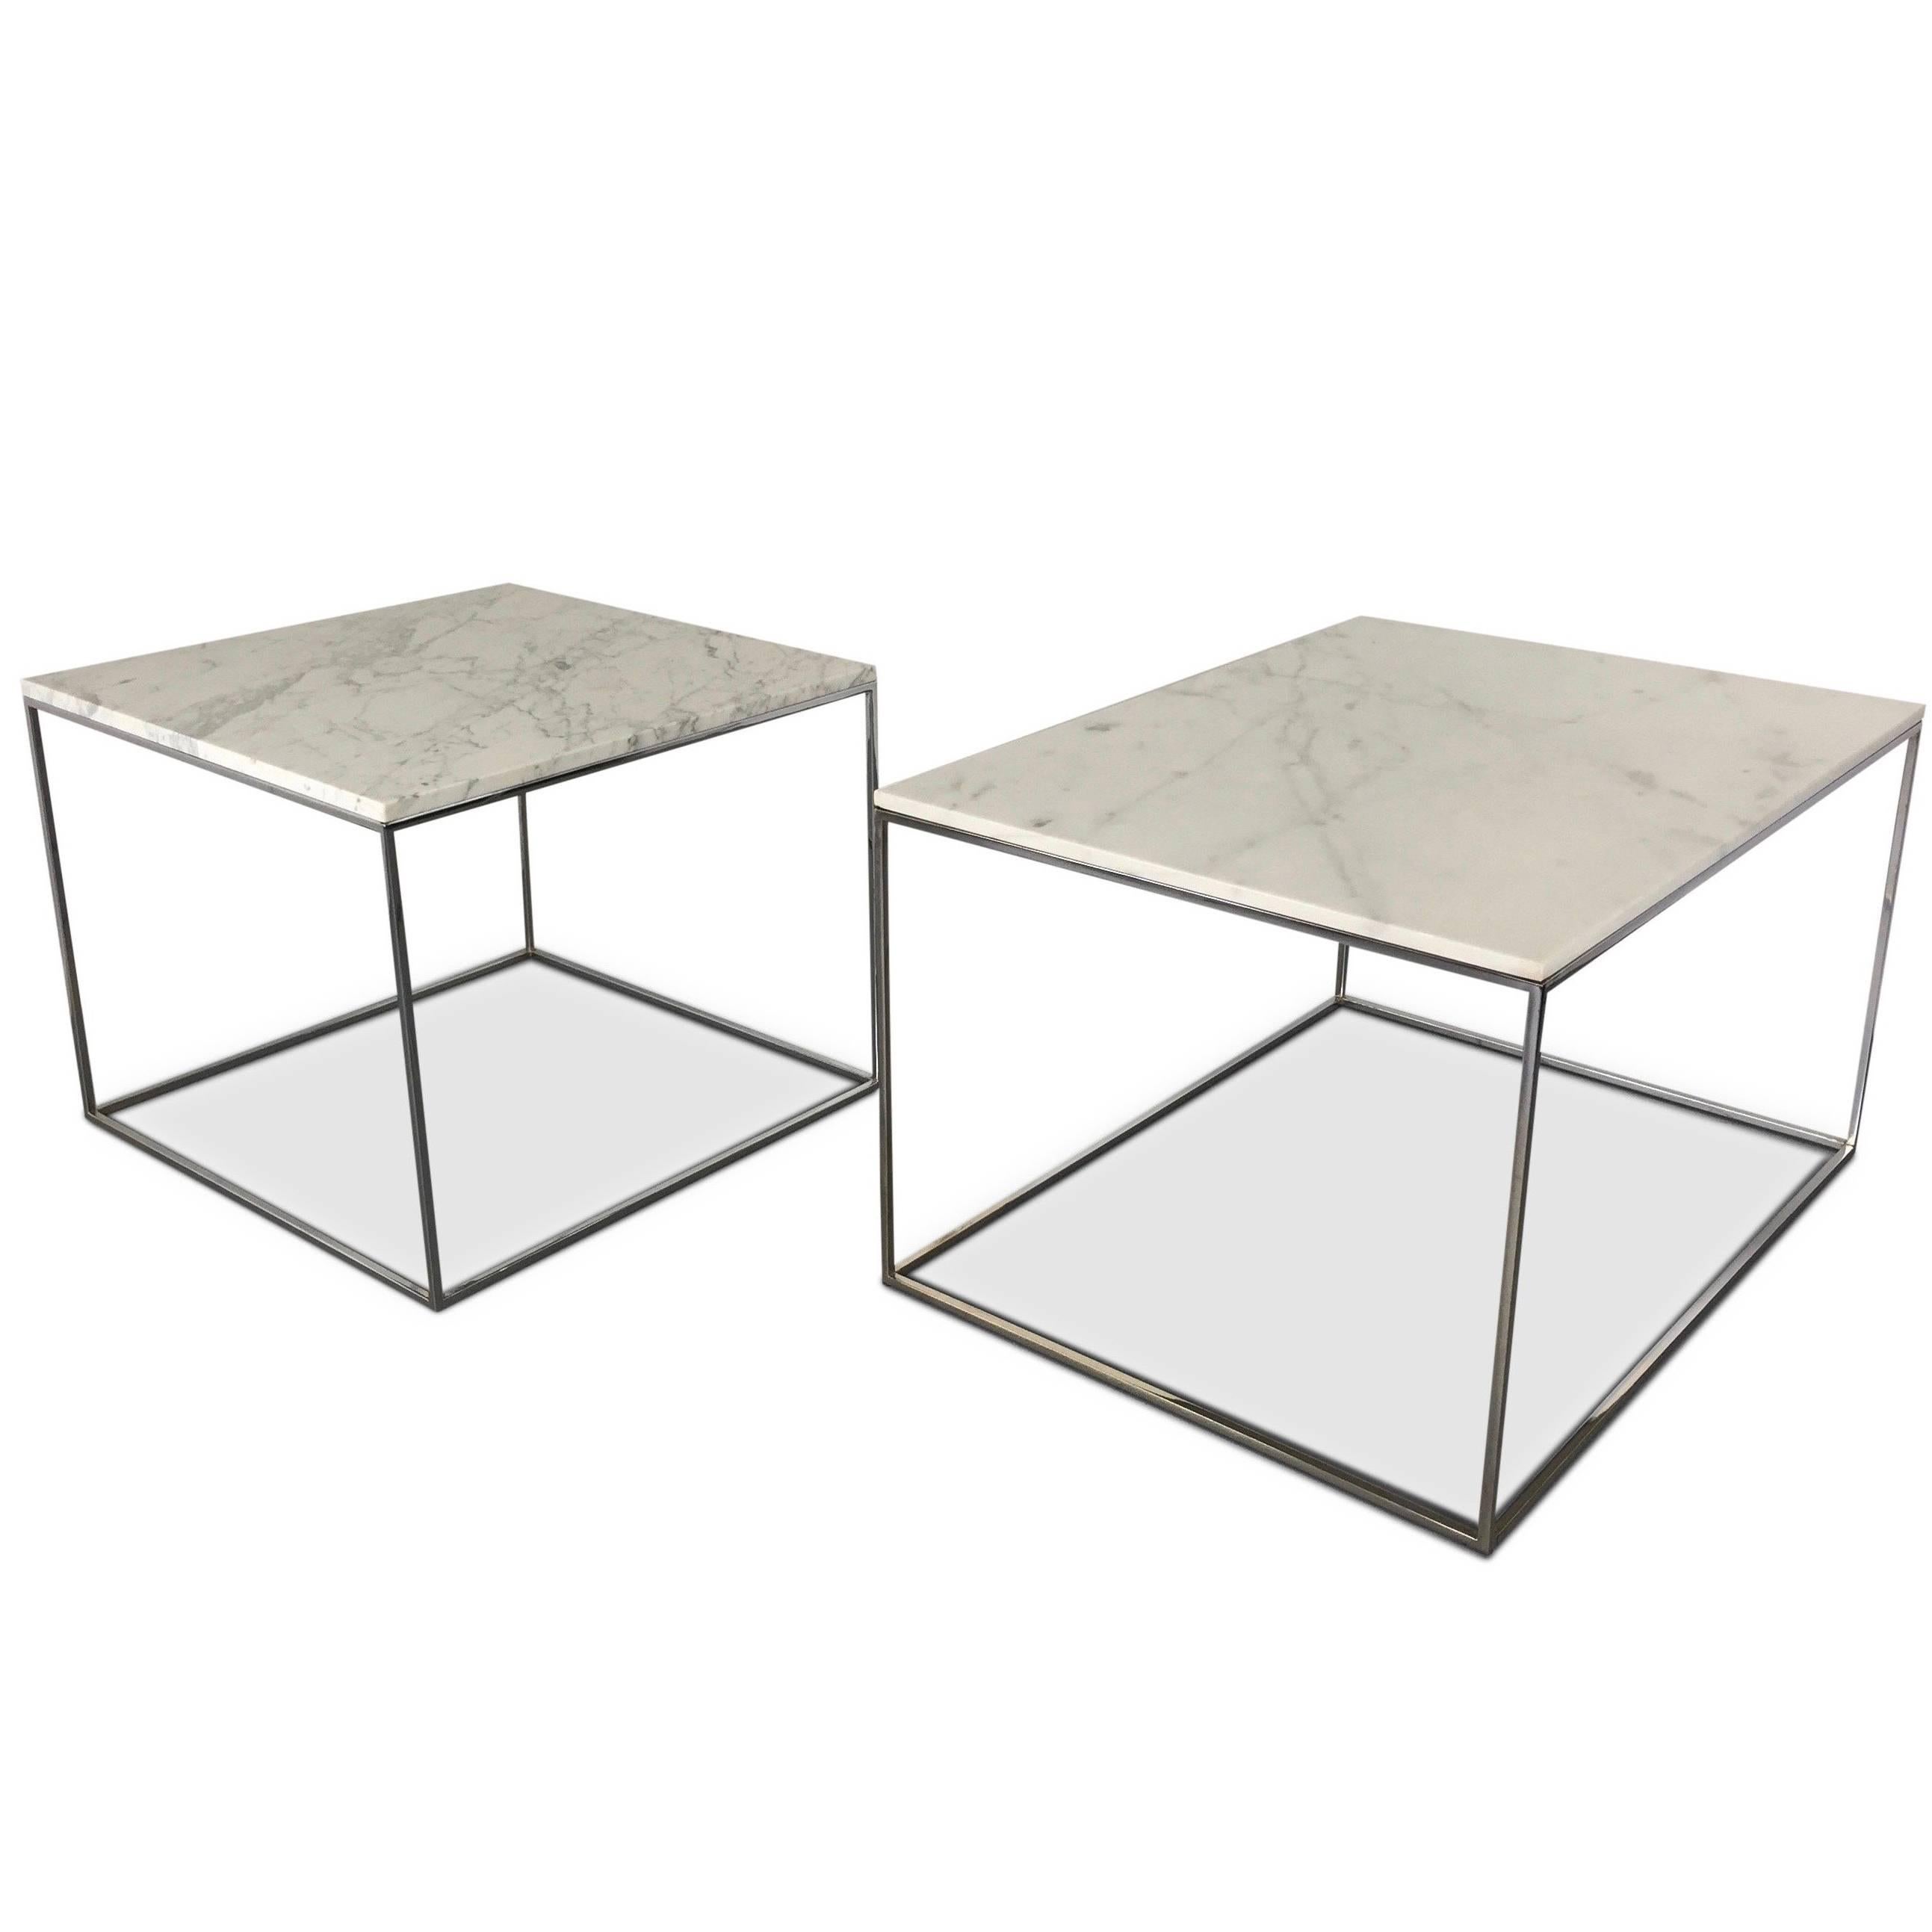 Milo Baughman for Thayer Coggin Chrome & Marble Occasional Tables, Midcentury